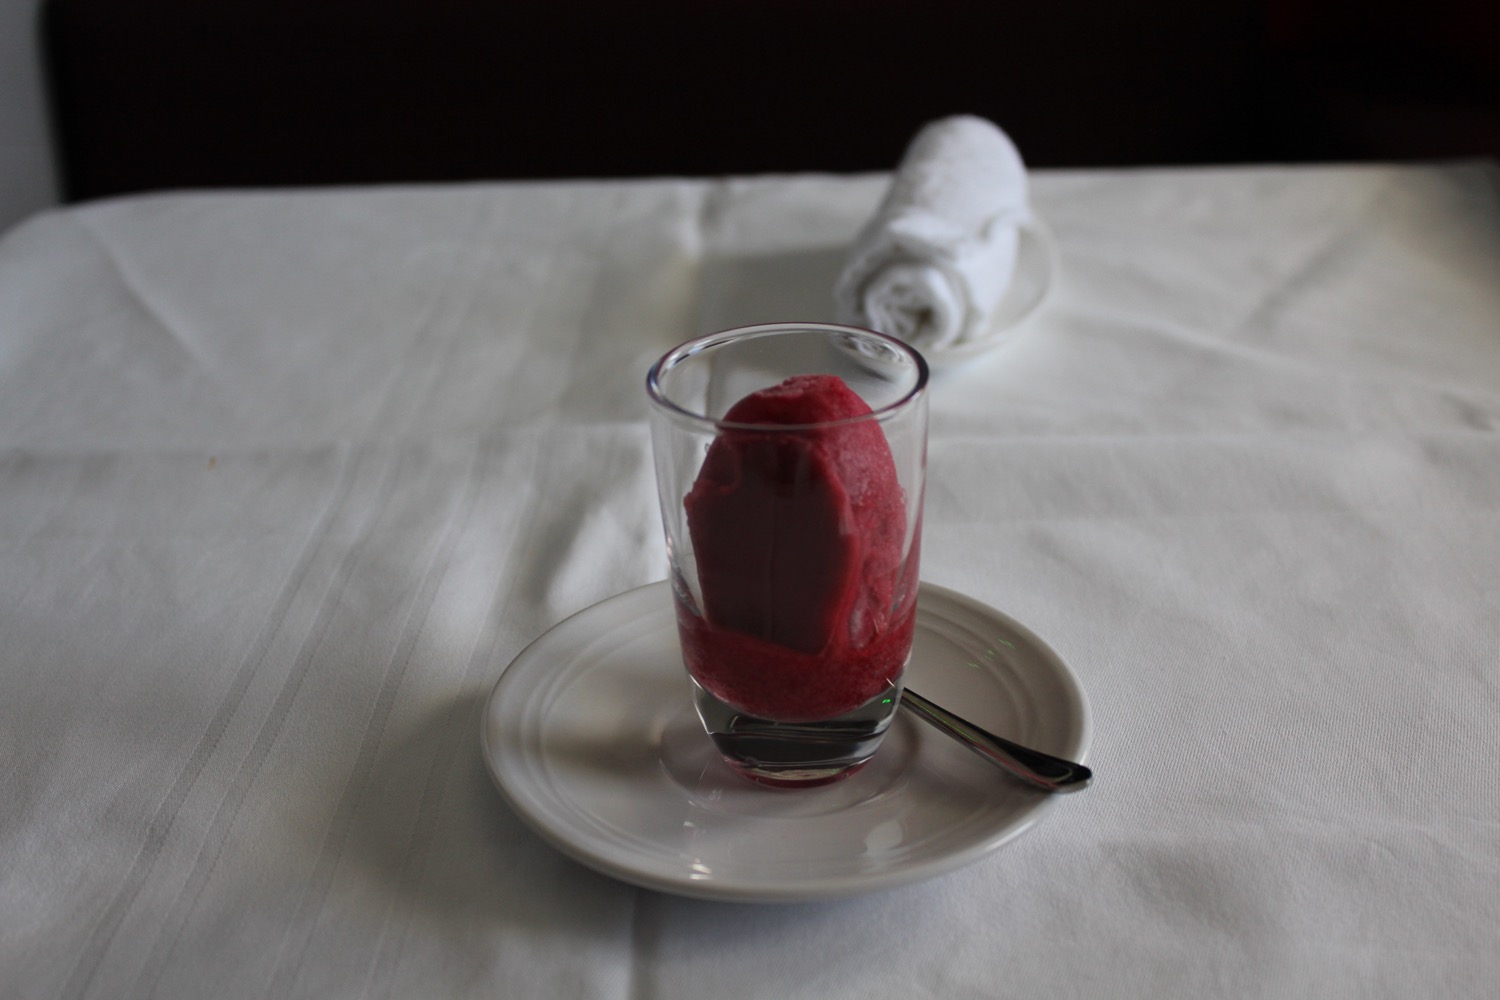 a glass with a red substance on a plate with a white towel